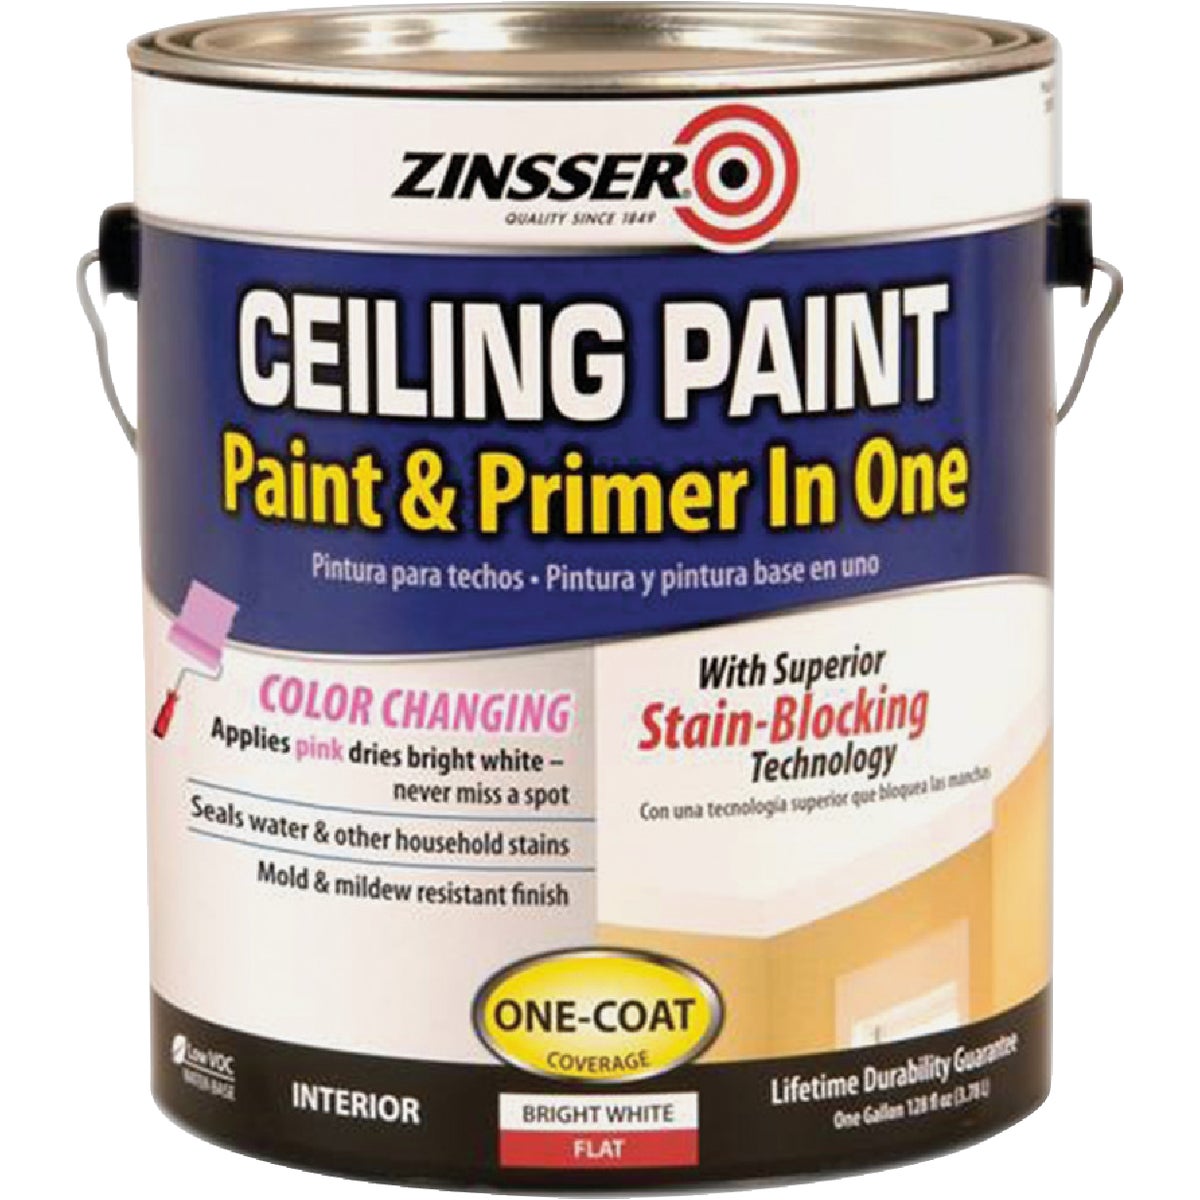 Zinsser Latex Paint & Primer In One Stainblock Flat Ceiling Paint, Bright White, 1 Gal.